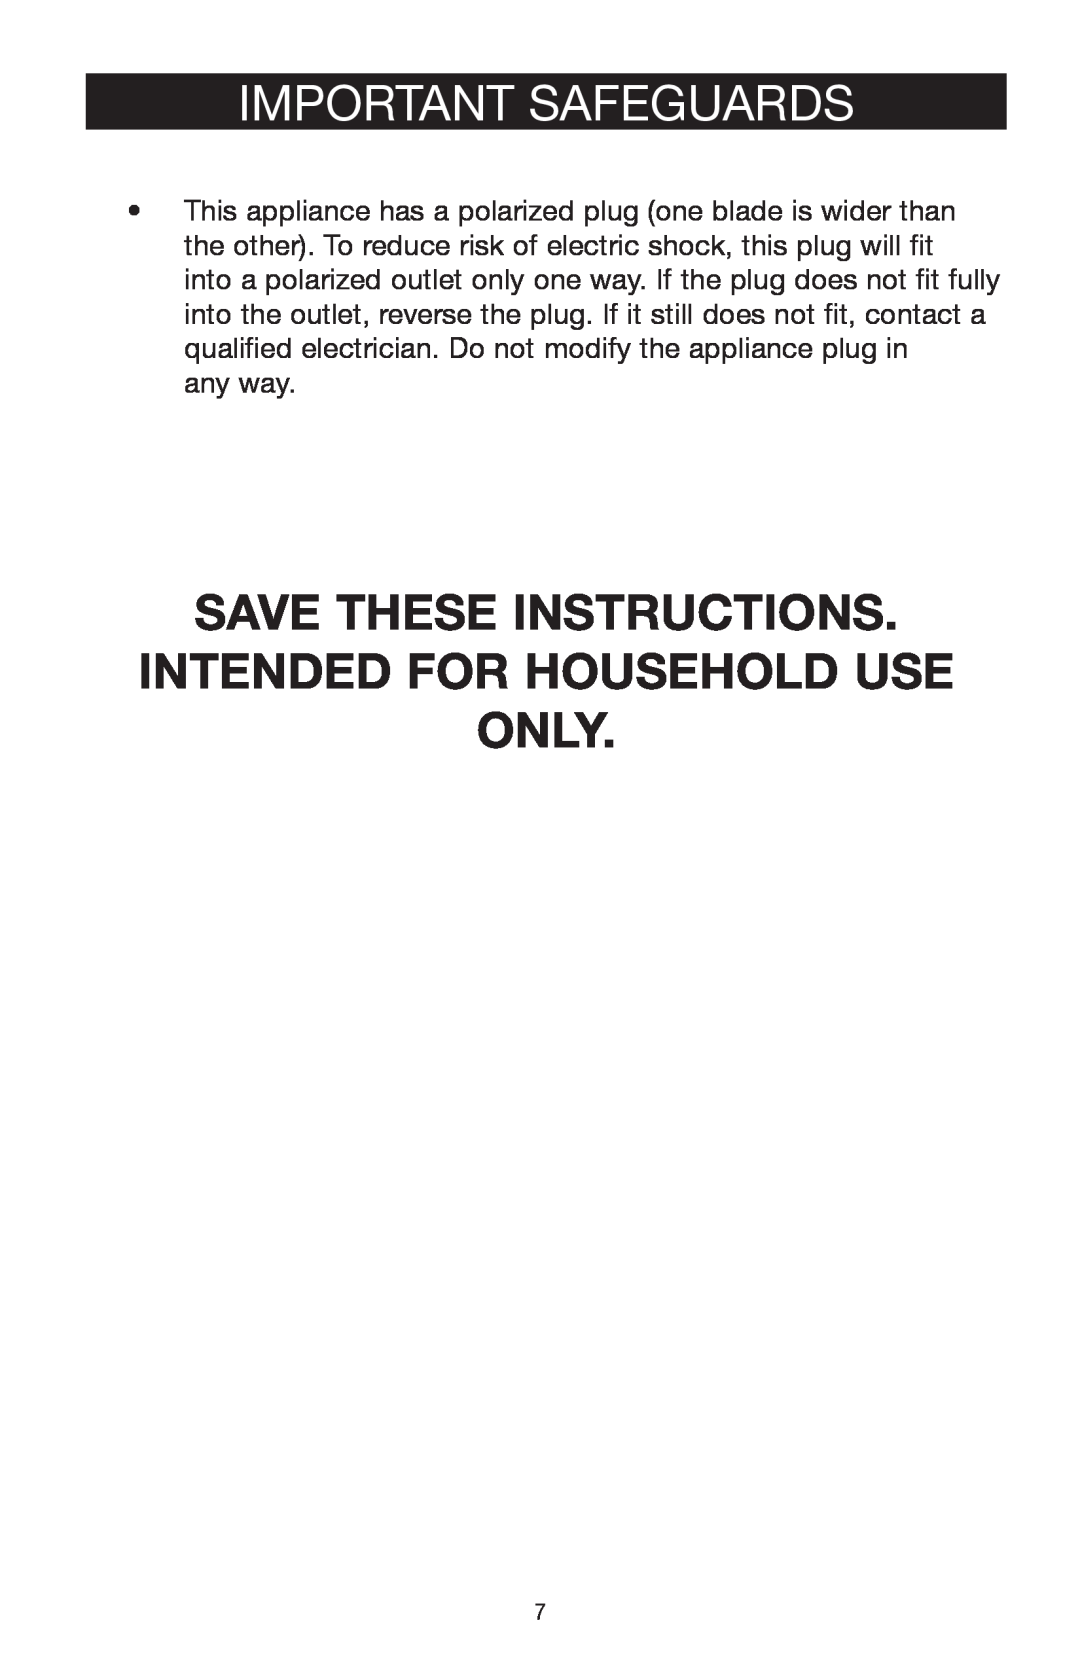 West Bend 3000 manual Important Safeguards, Save These Instructions Intended For Household Use Only 